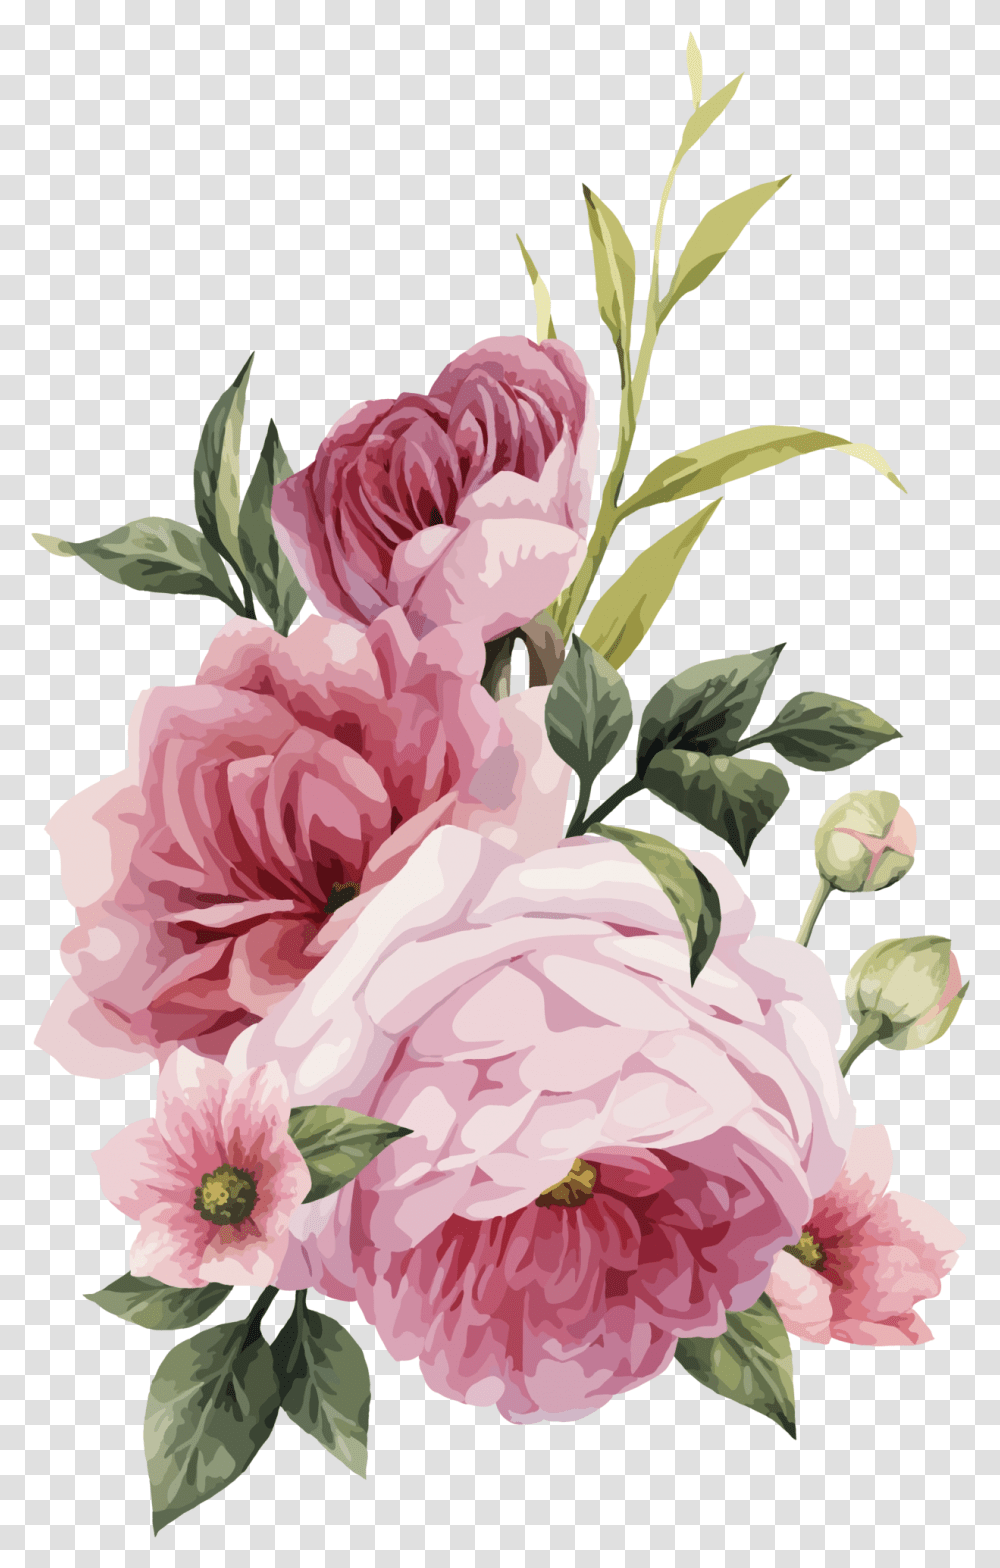 Watercolor Wedding Flowers Wedding Flowers Background, Plant, Blossom, Peony, Floral Design Transparent Png